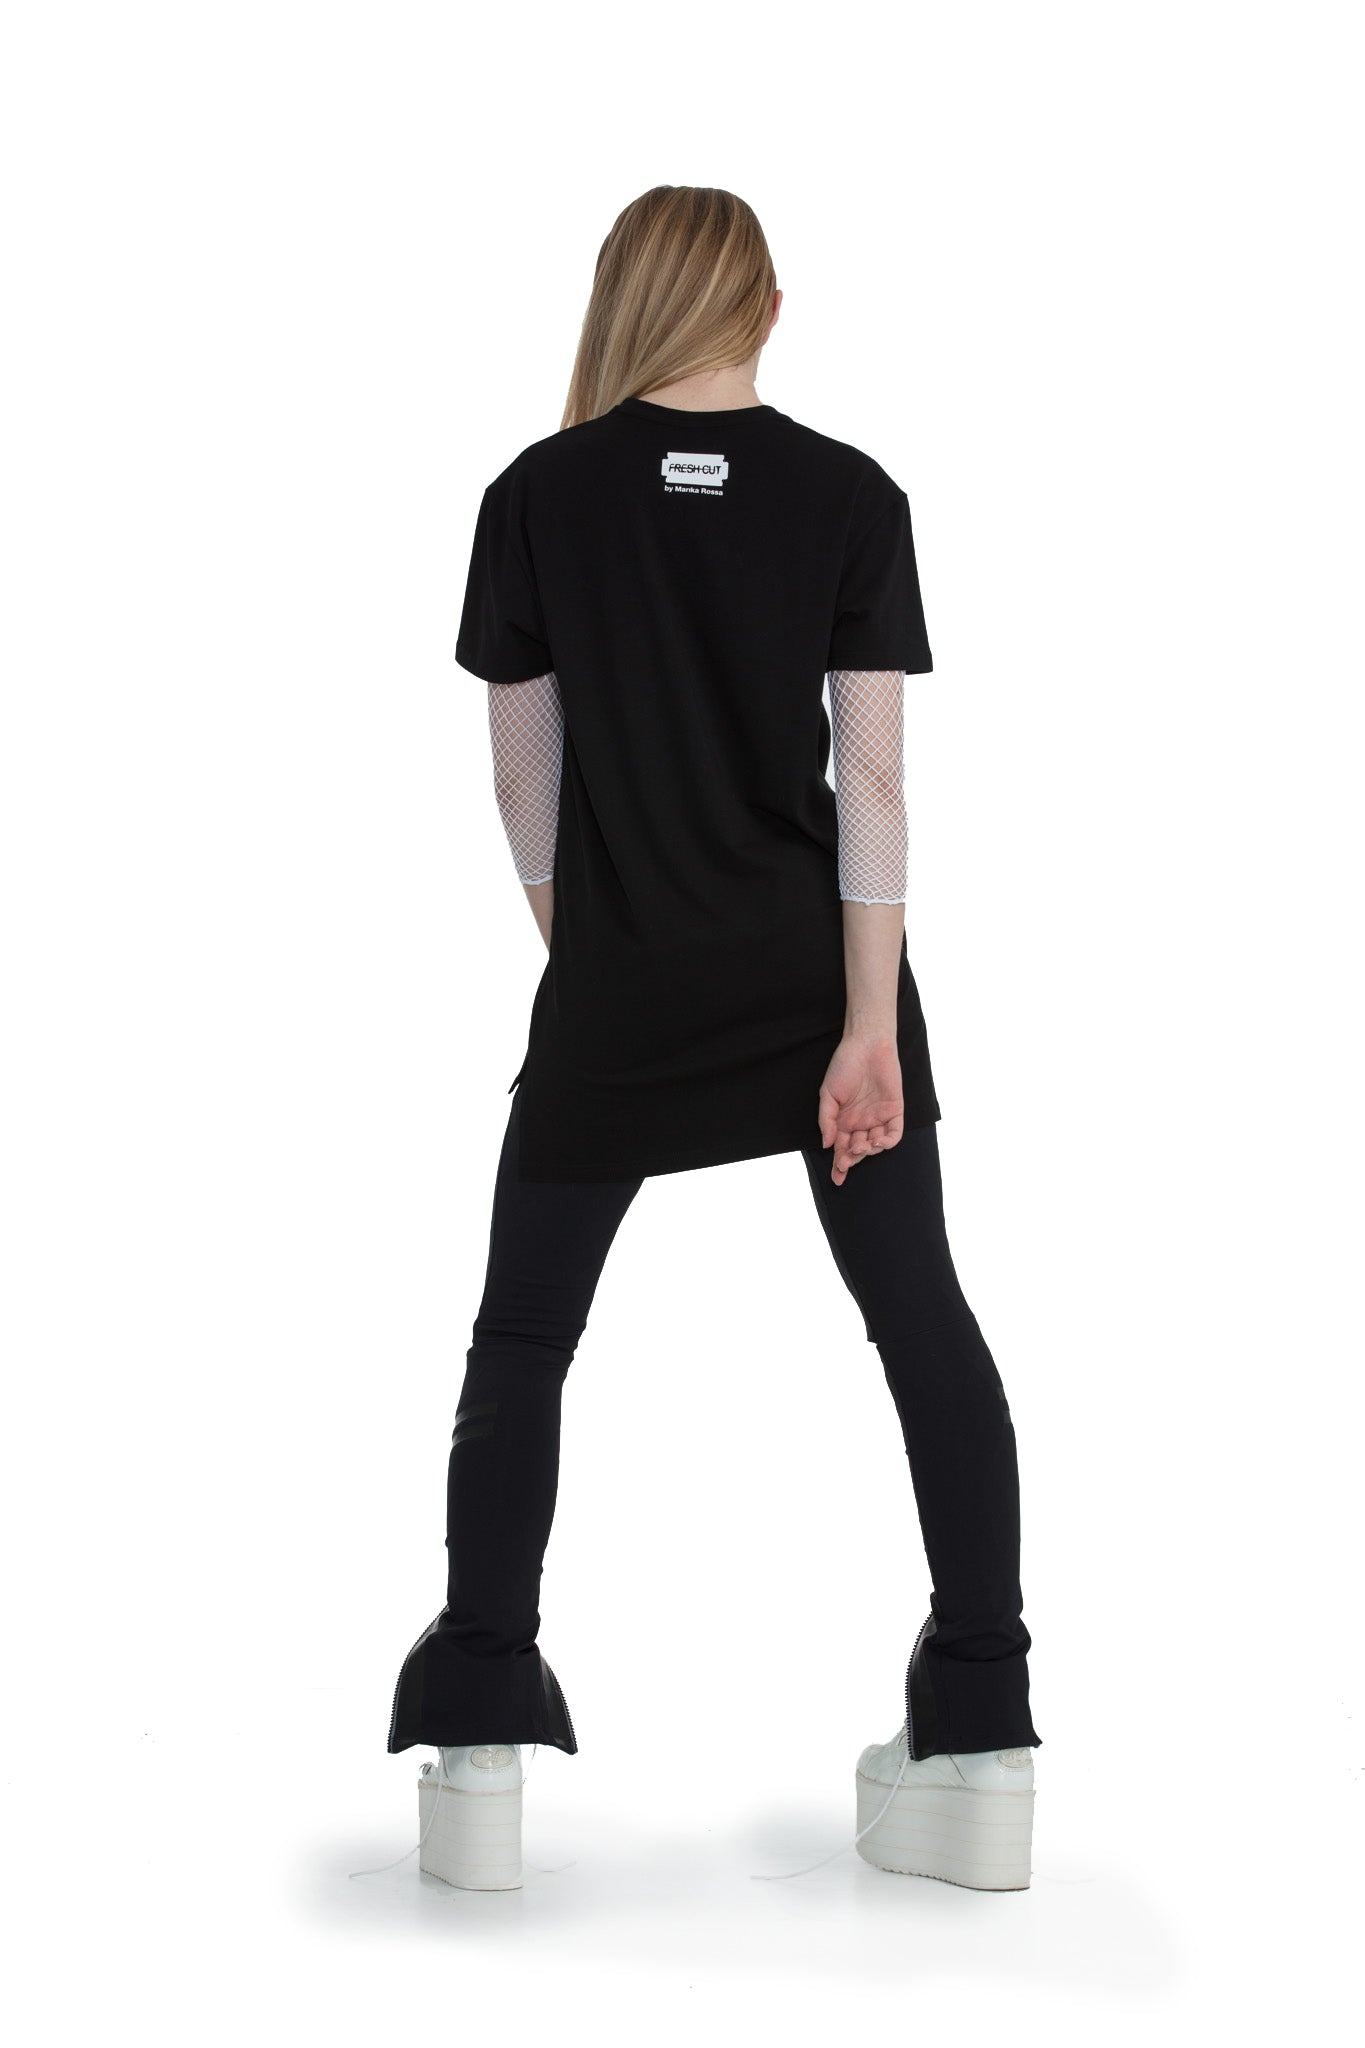 Vinyl Fetish - regular fit T-shirt with side cuts